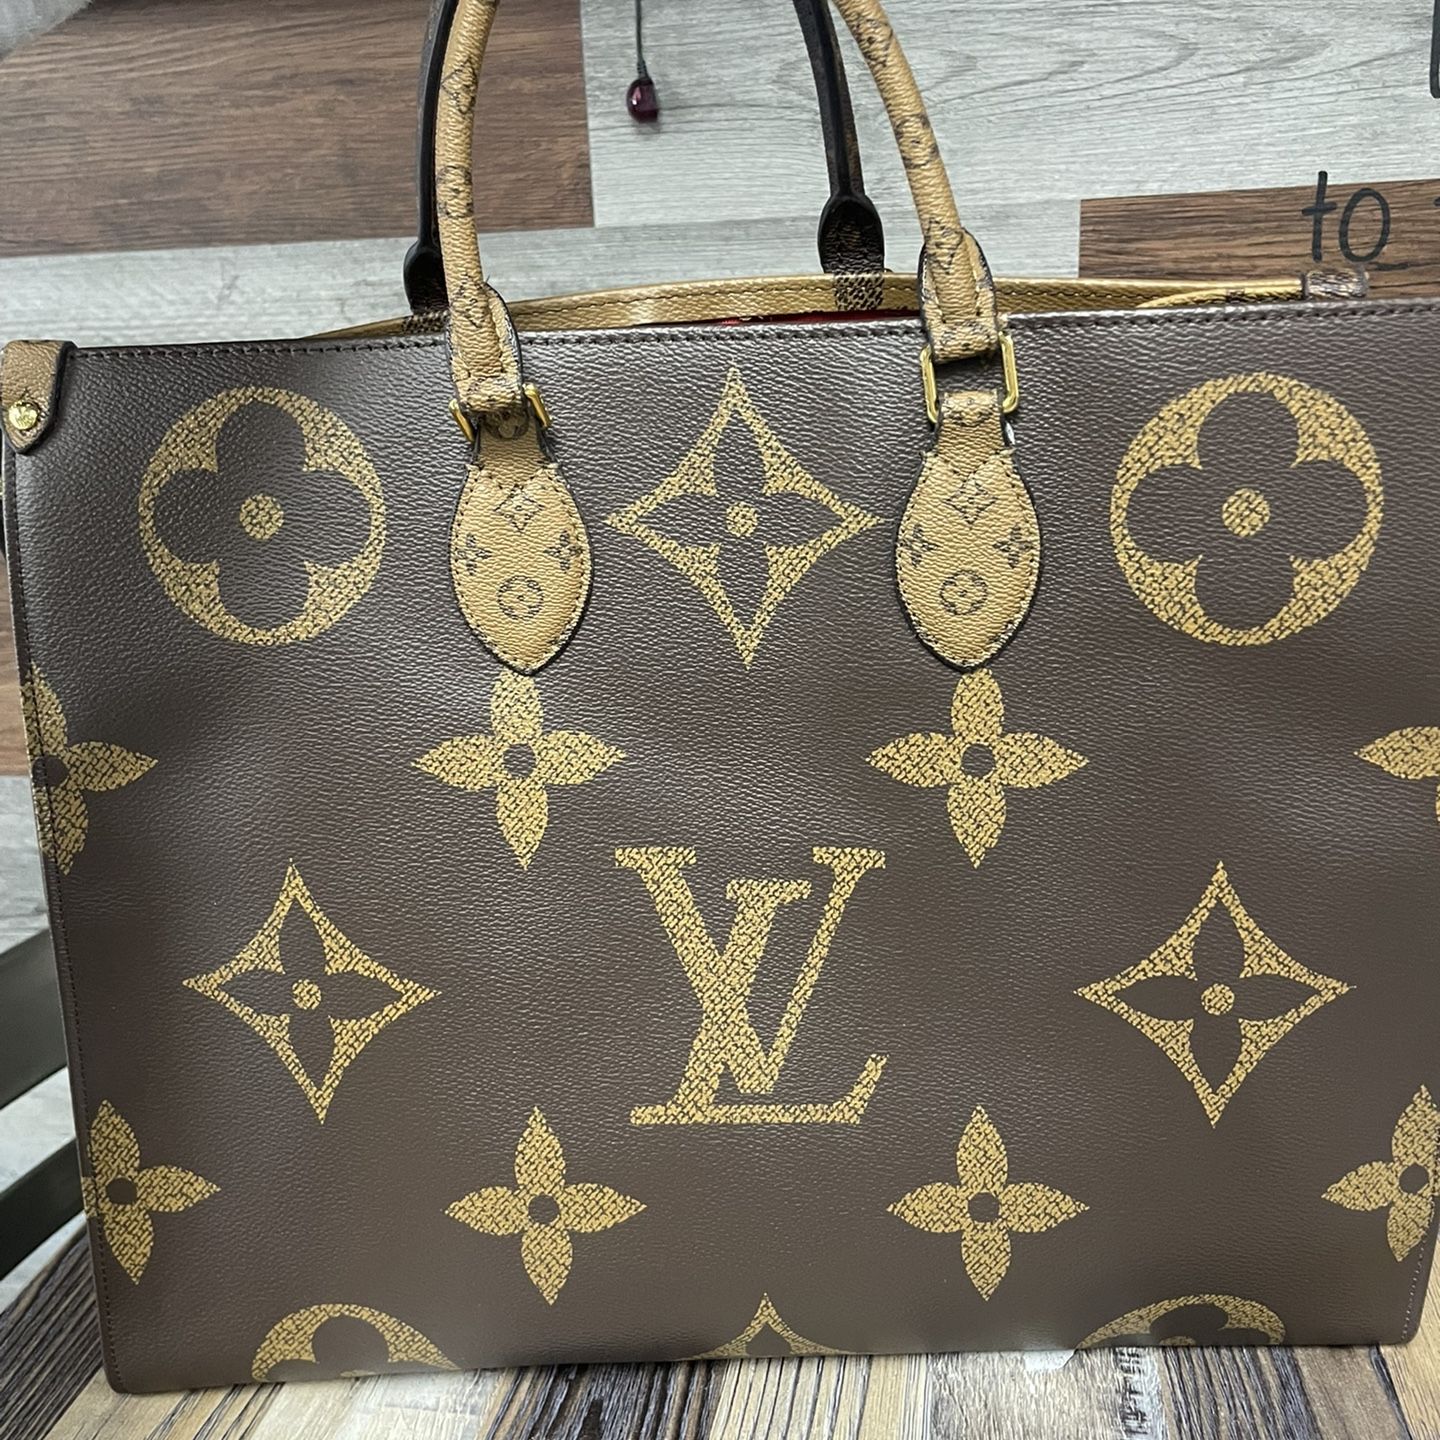 Louis Vuitton Purses for Sale in Long Beach, CA - OfferUp